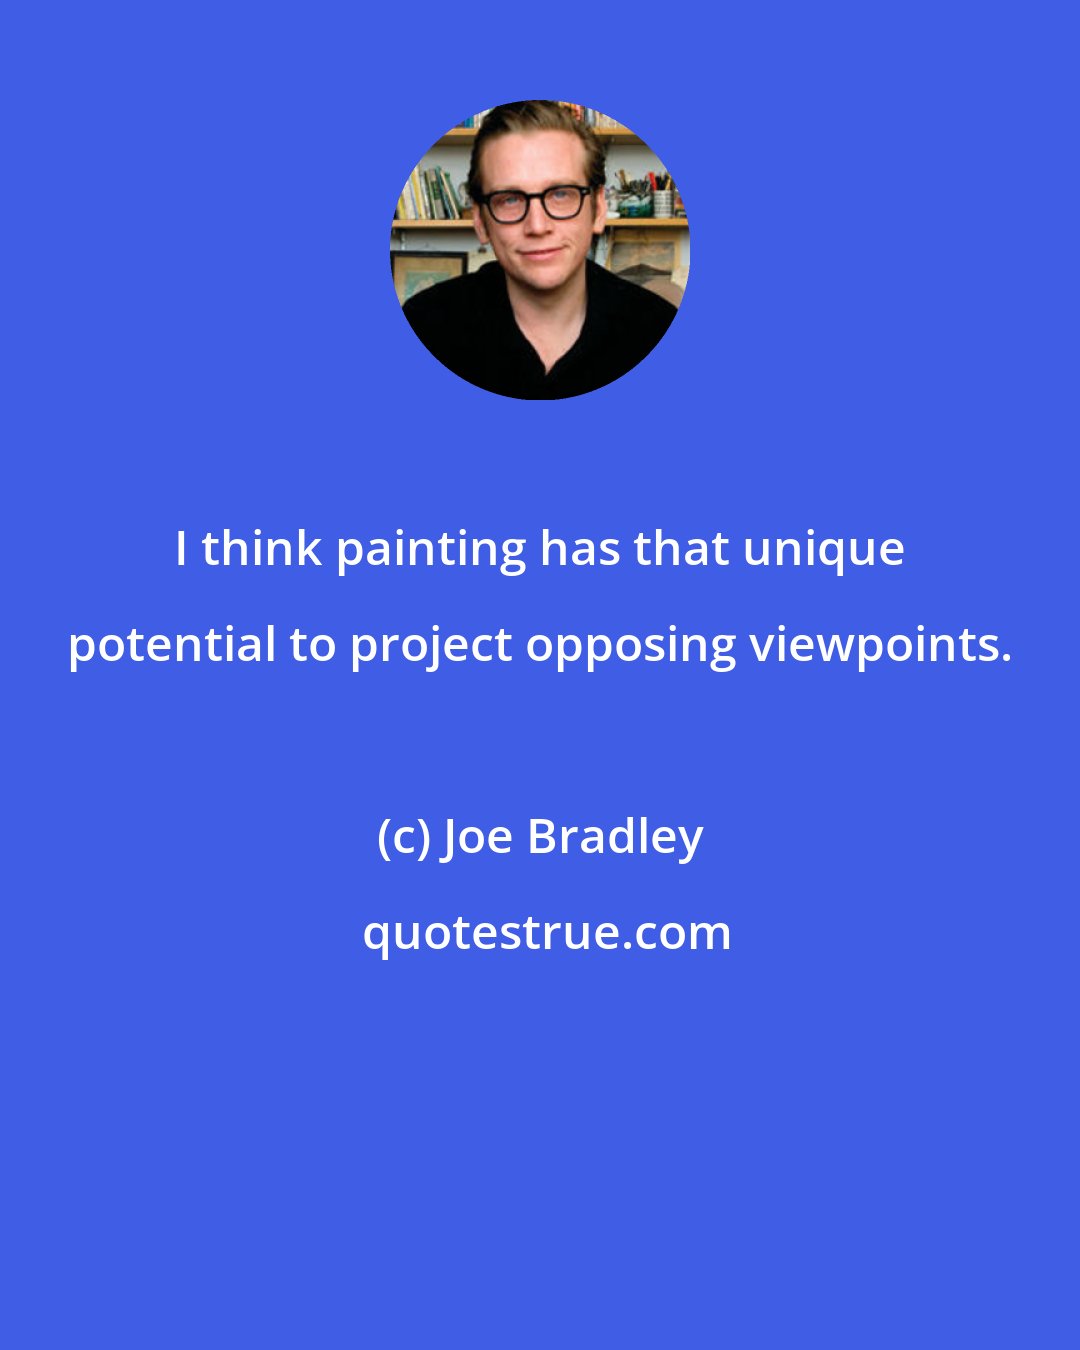 Joe Bradley: I think painting has that unique potential to project opposing viewpoints.